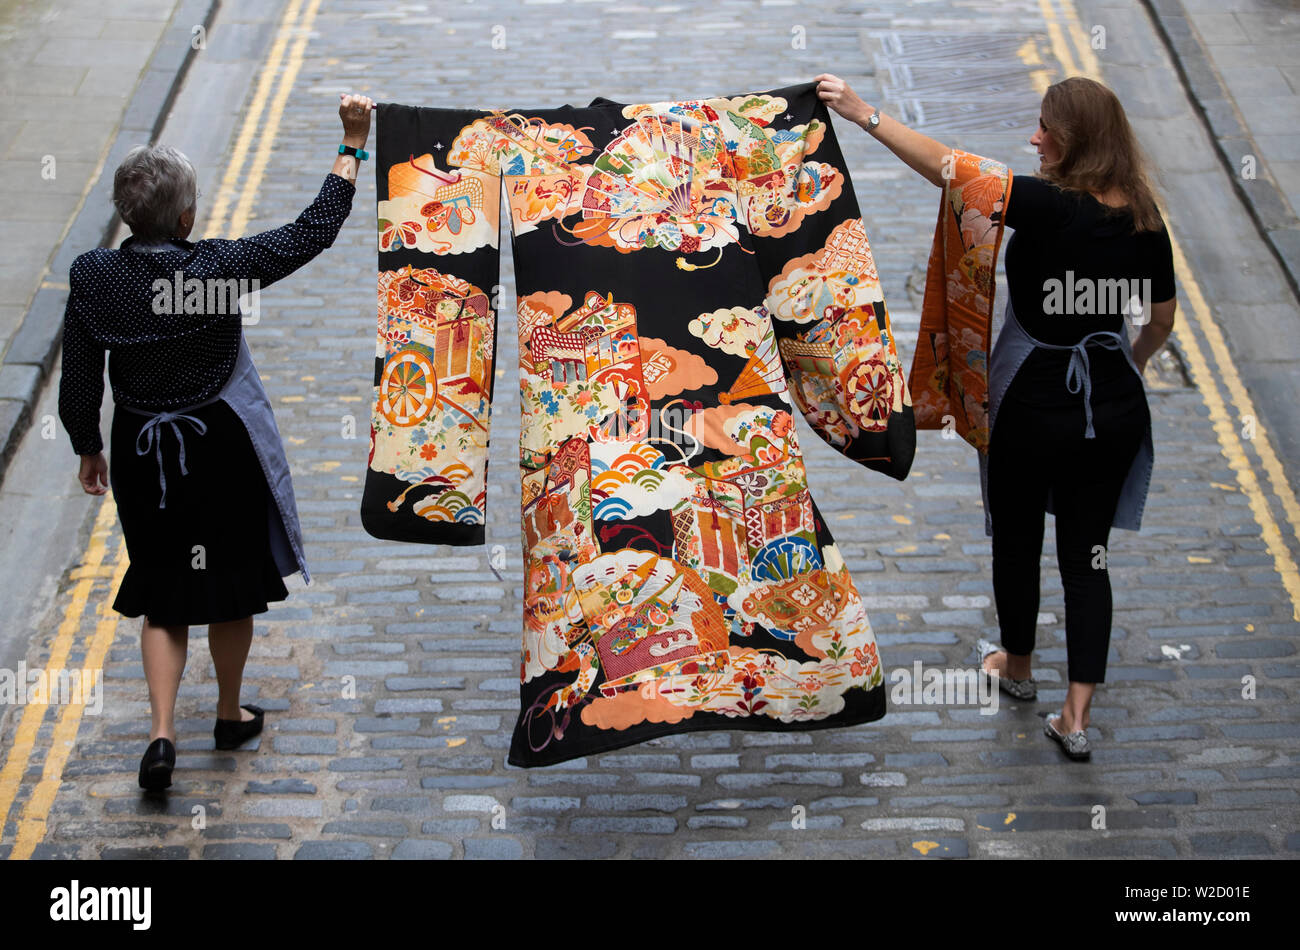 Lorna MacGregor (left) and Charlotte Canby, from Bonhams, Edinburgh, carry a rare 19th Century Japanese furisode silk kimono and obi (sash) which will be sold at auction in the forthcoming Asian Art Sale on Thursday July 11. Stock Photo